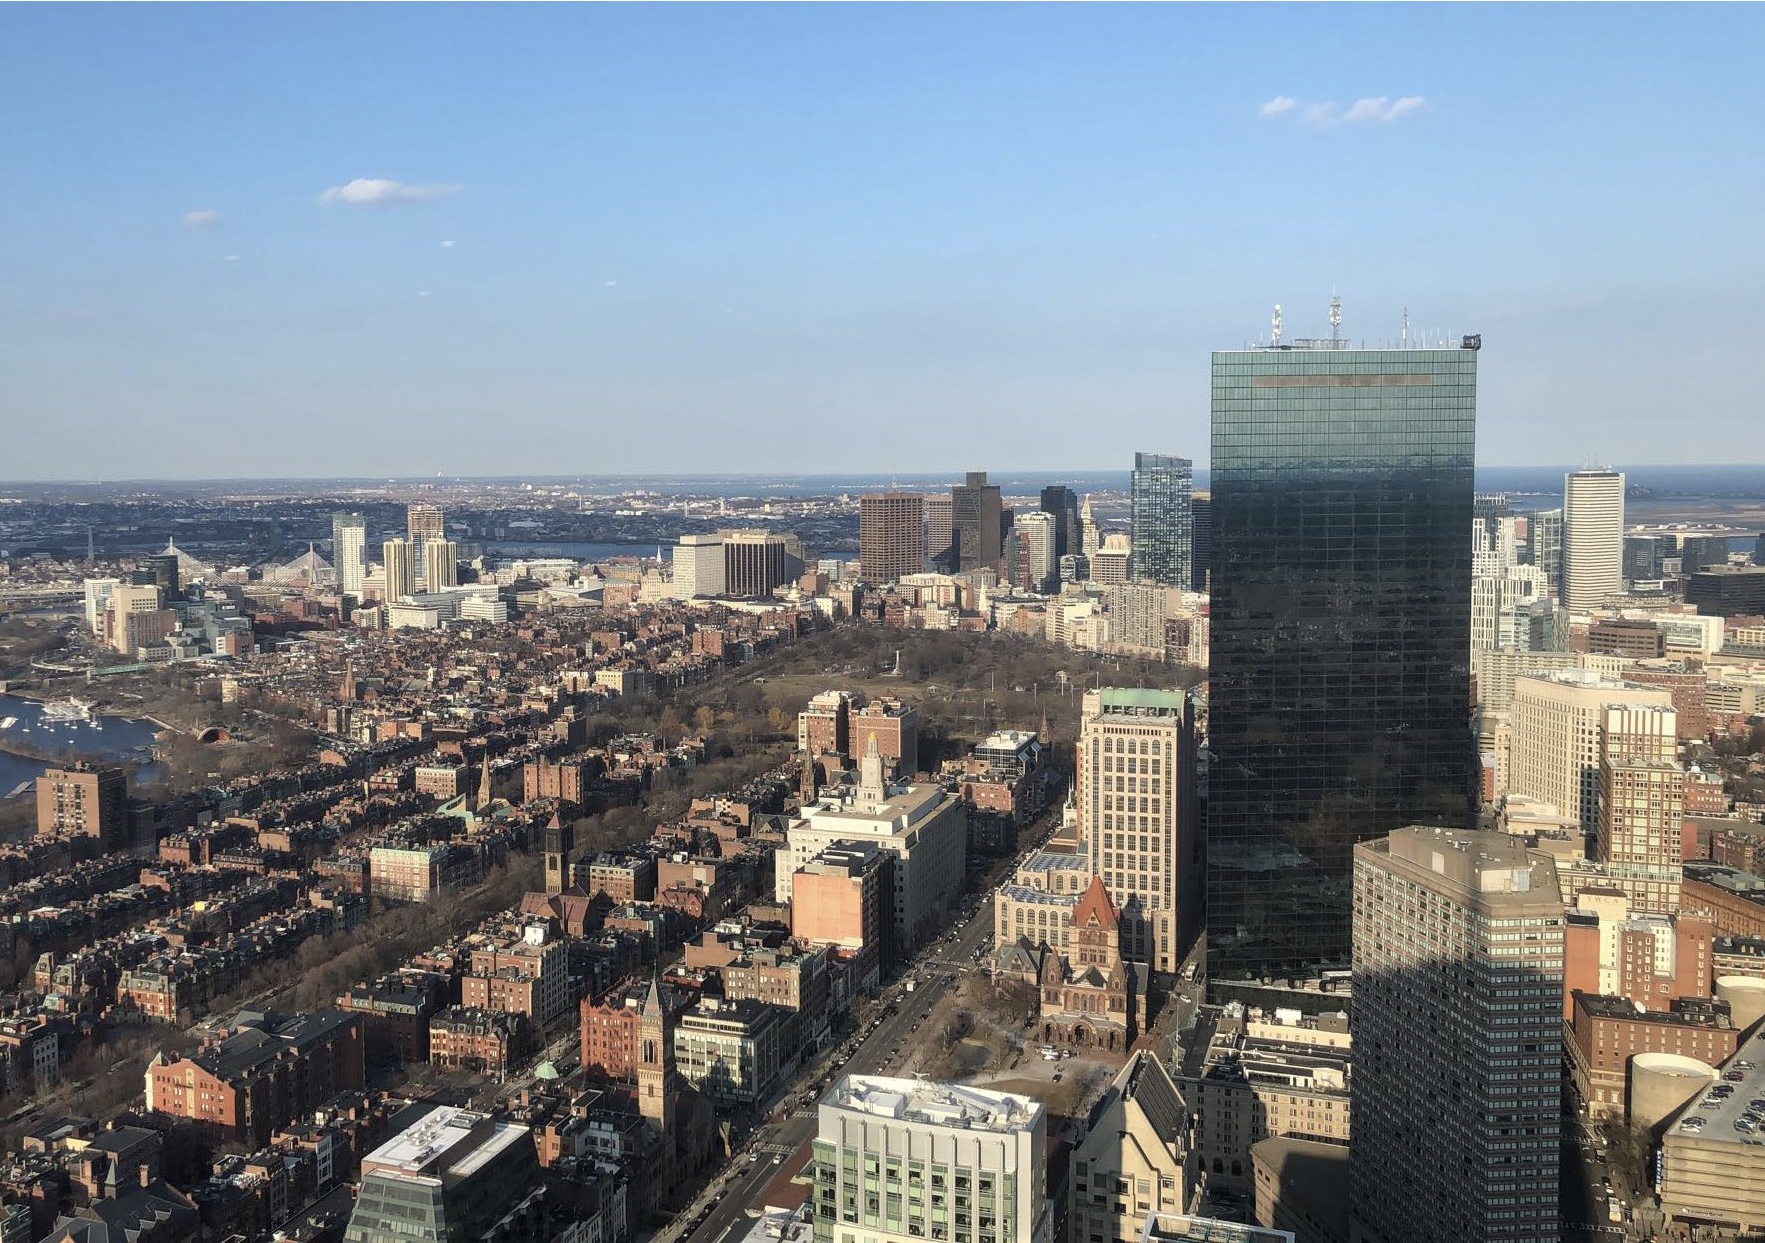  View of Boston from the Prudential Tower. The sky is clear and the John Hancock tower is in the frame.